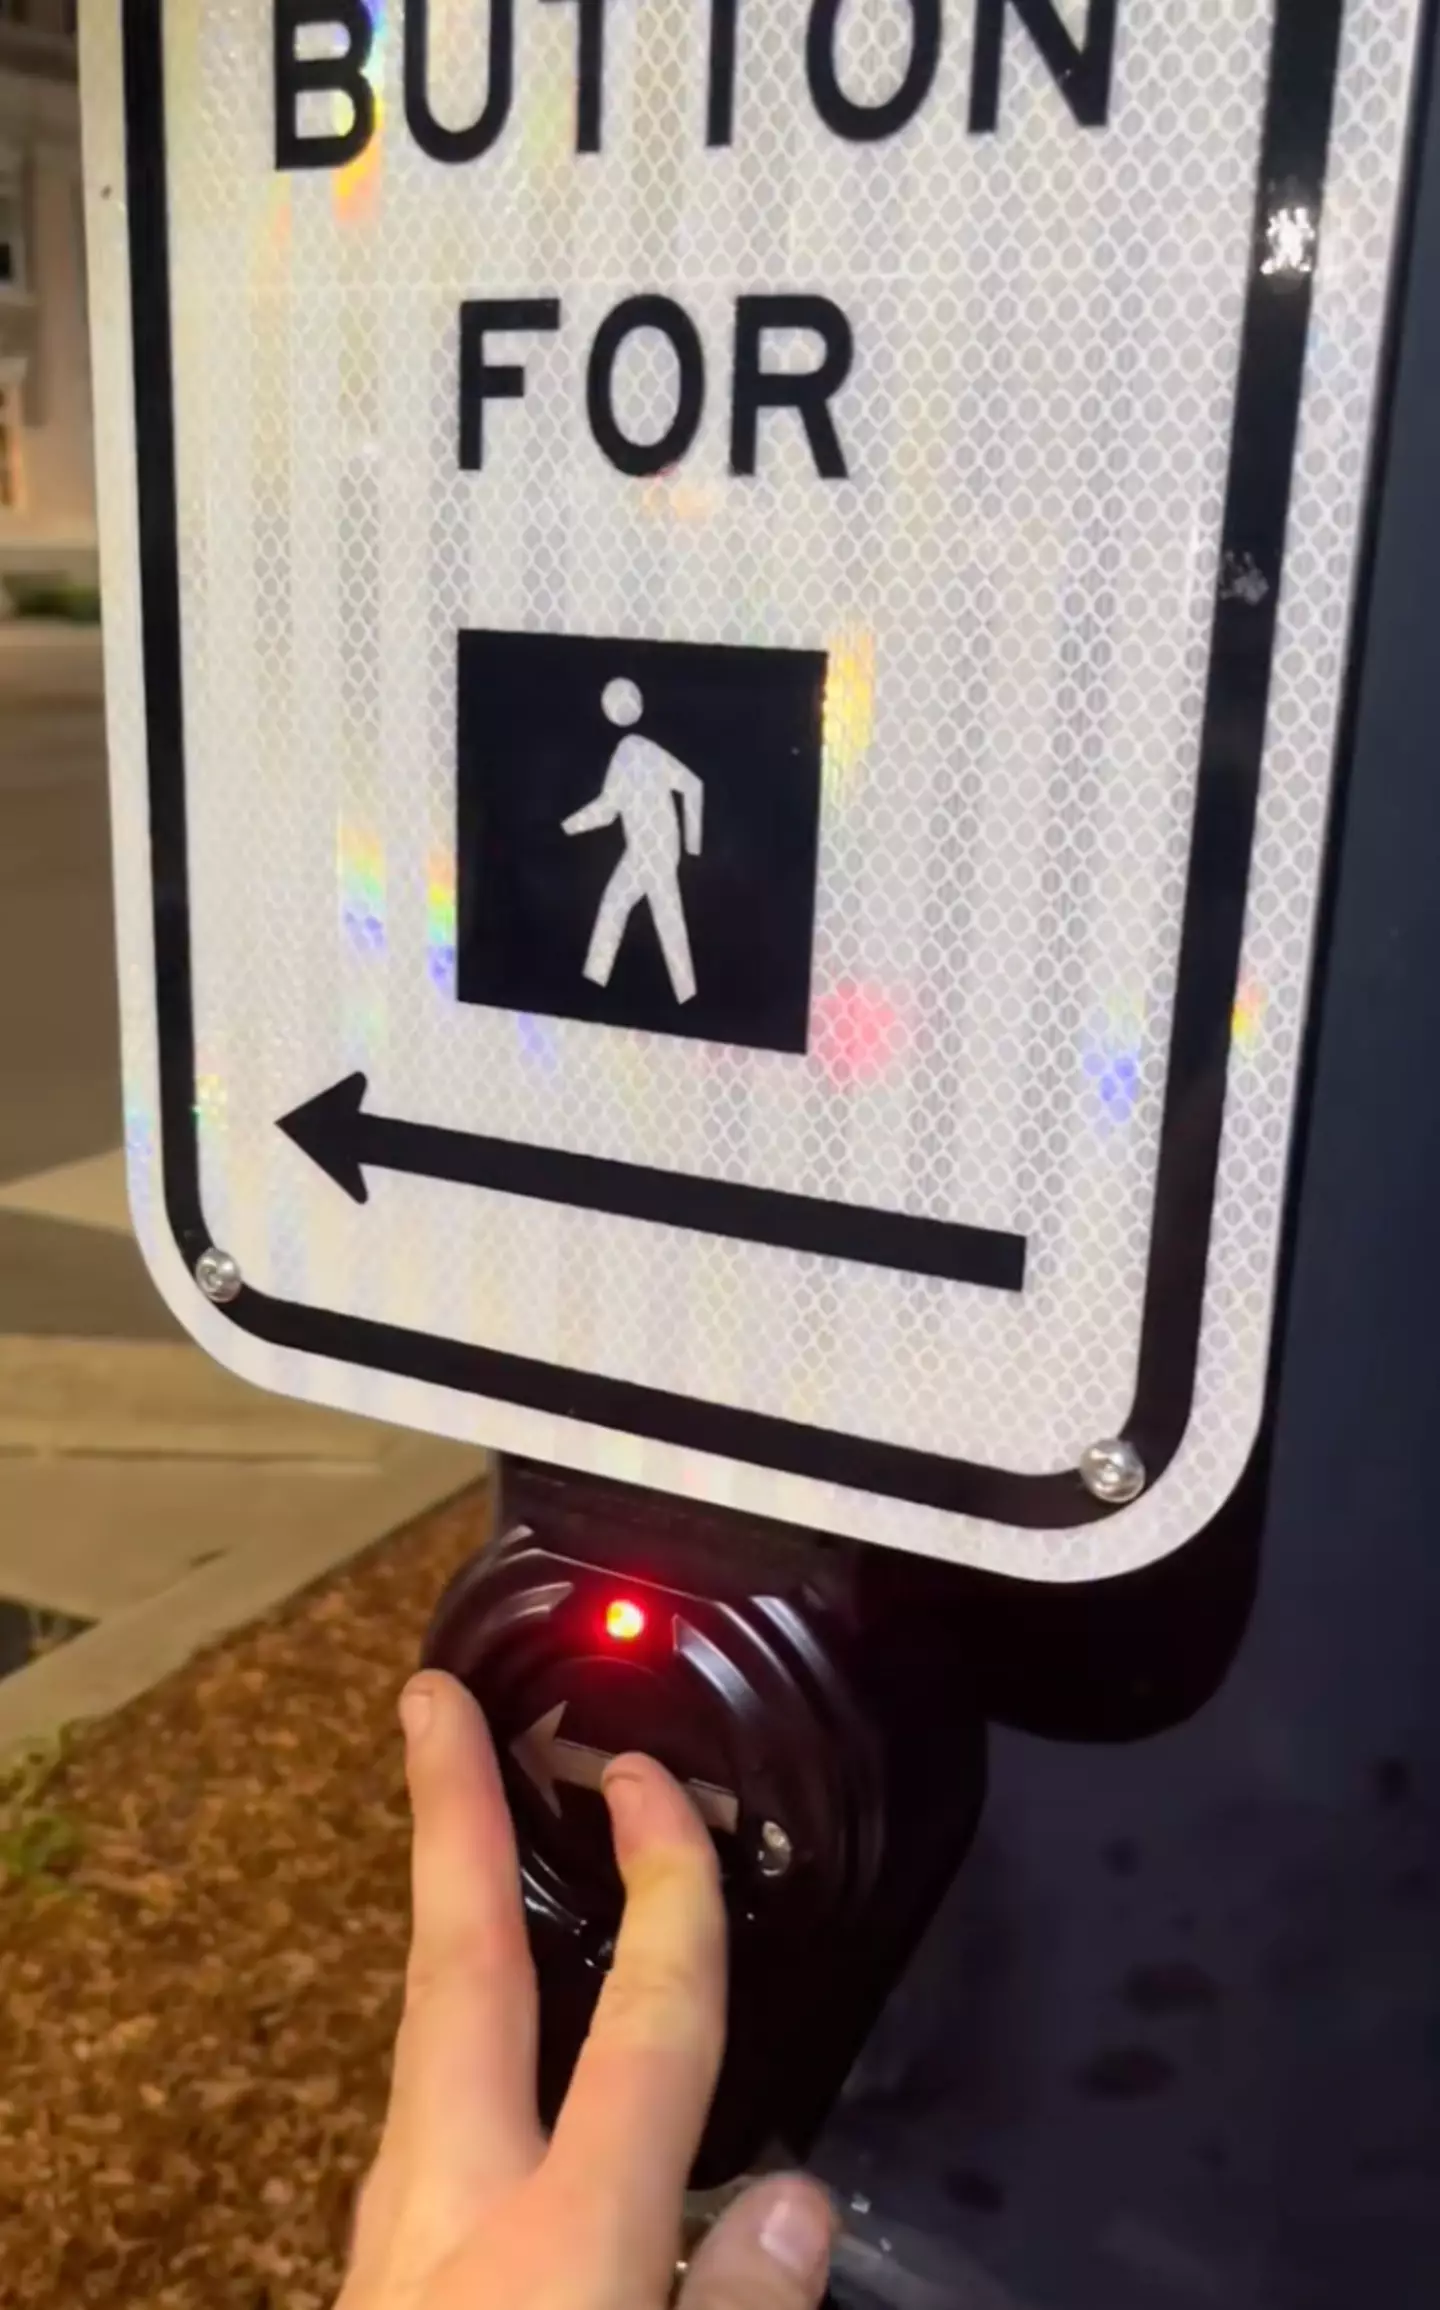 The expert revealed how certain pedestrian buttons work, and how the transmitter works.